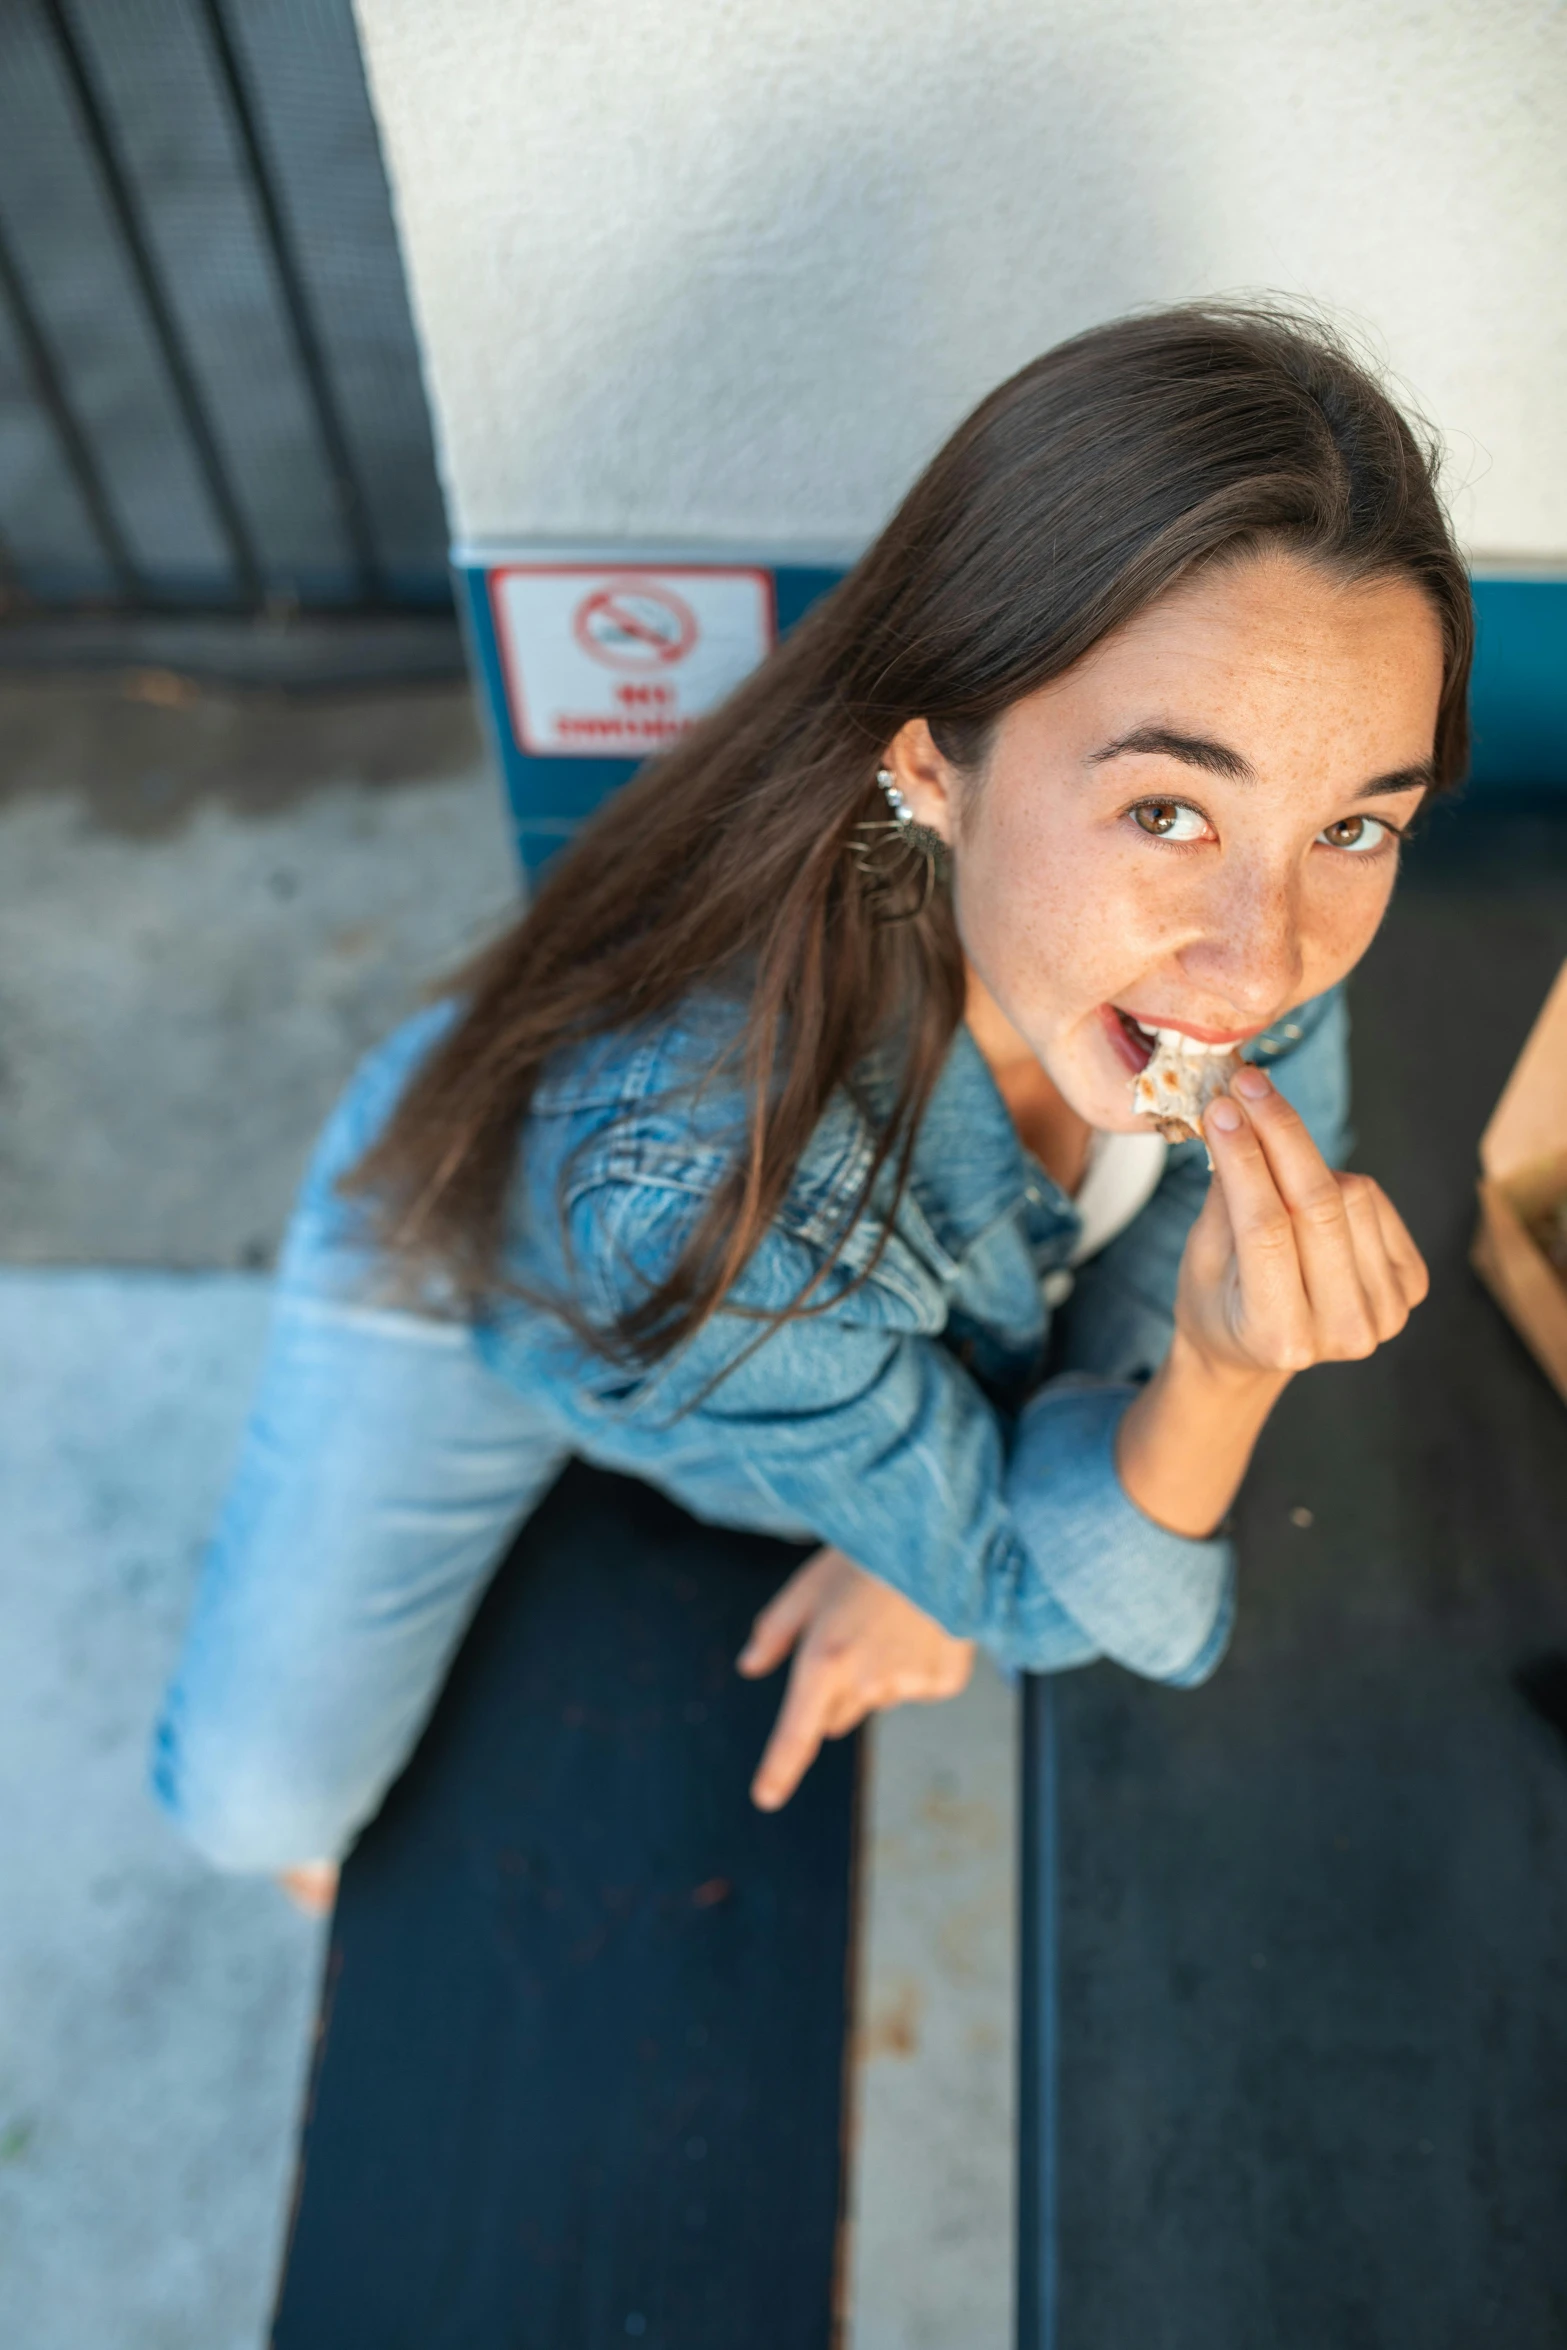 an overhead view of a woman brushing her teeth, pexels contest winner, happening, wearing a jeans jackets, isabela moner, having a snack, tongue out